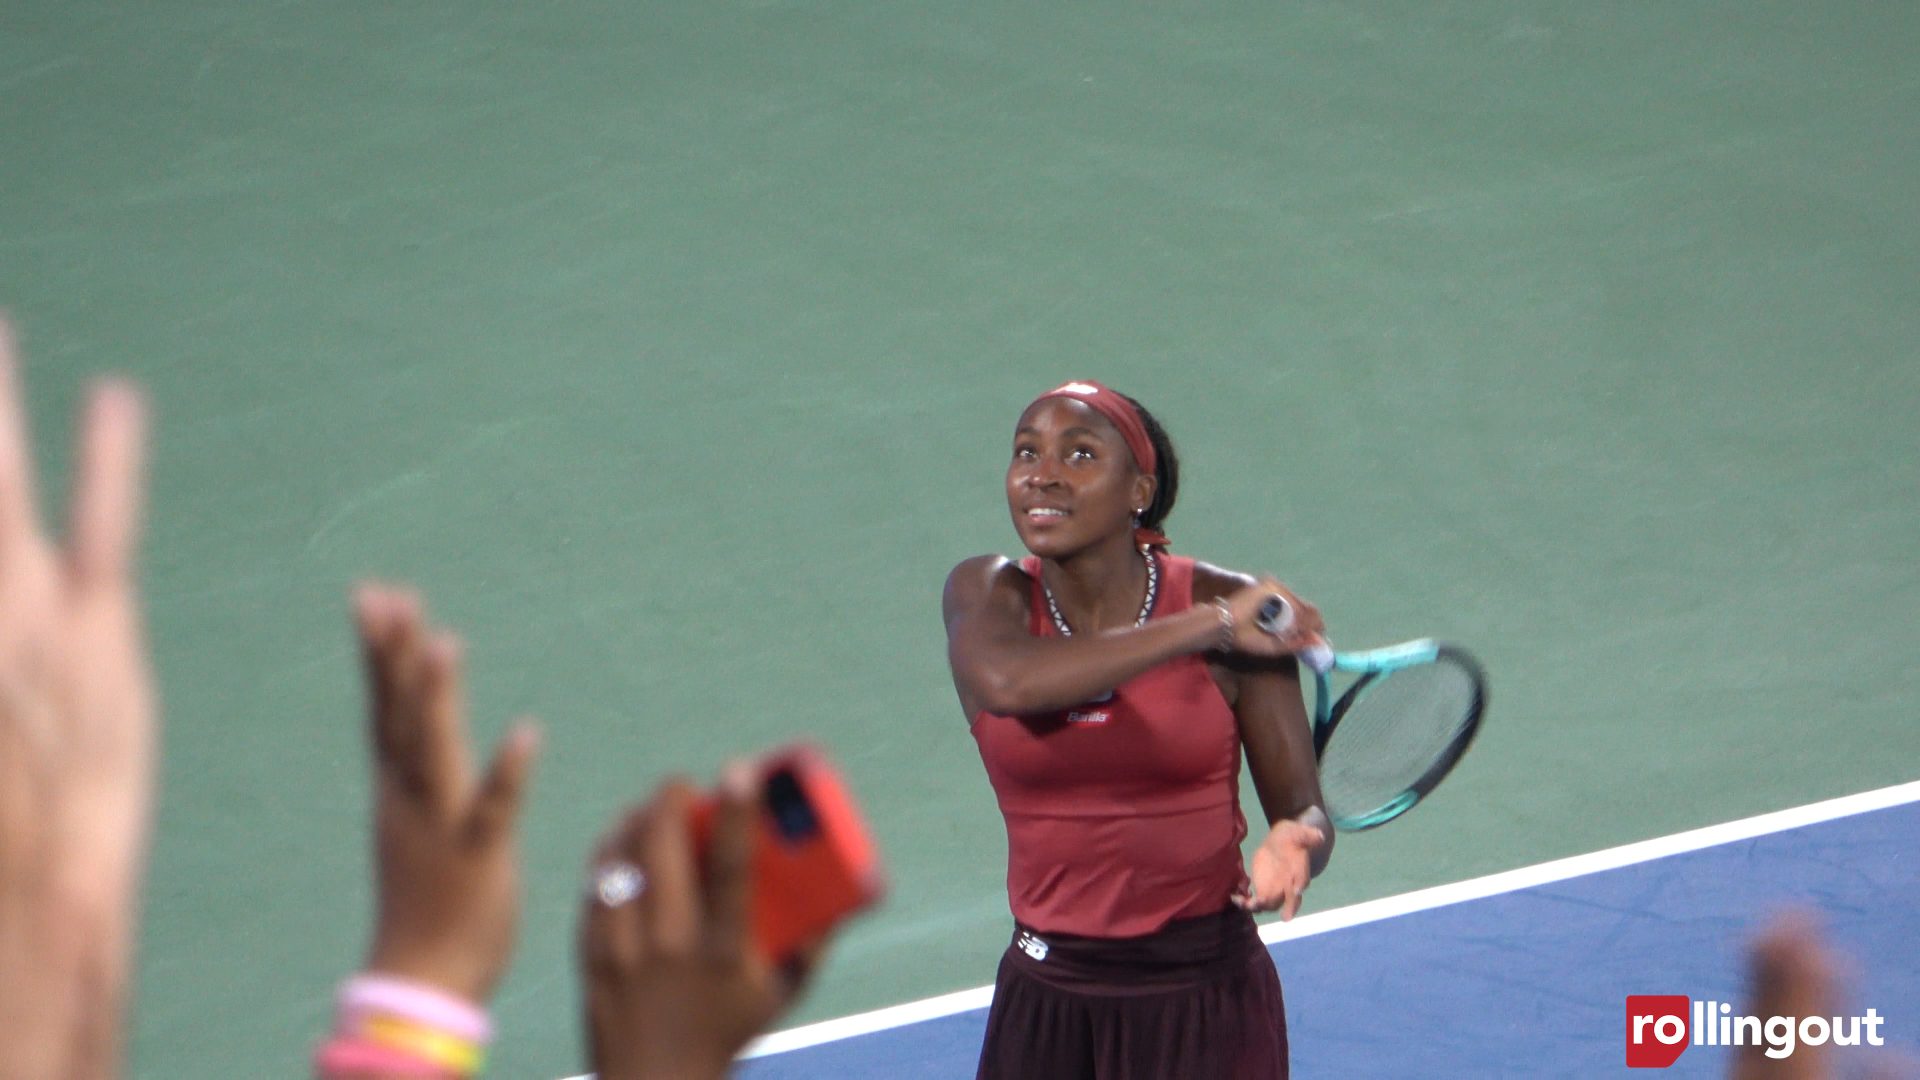 Watch 8yearold Coco Gauff dancing at US Open she wins at 19 (video)